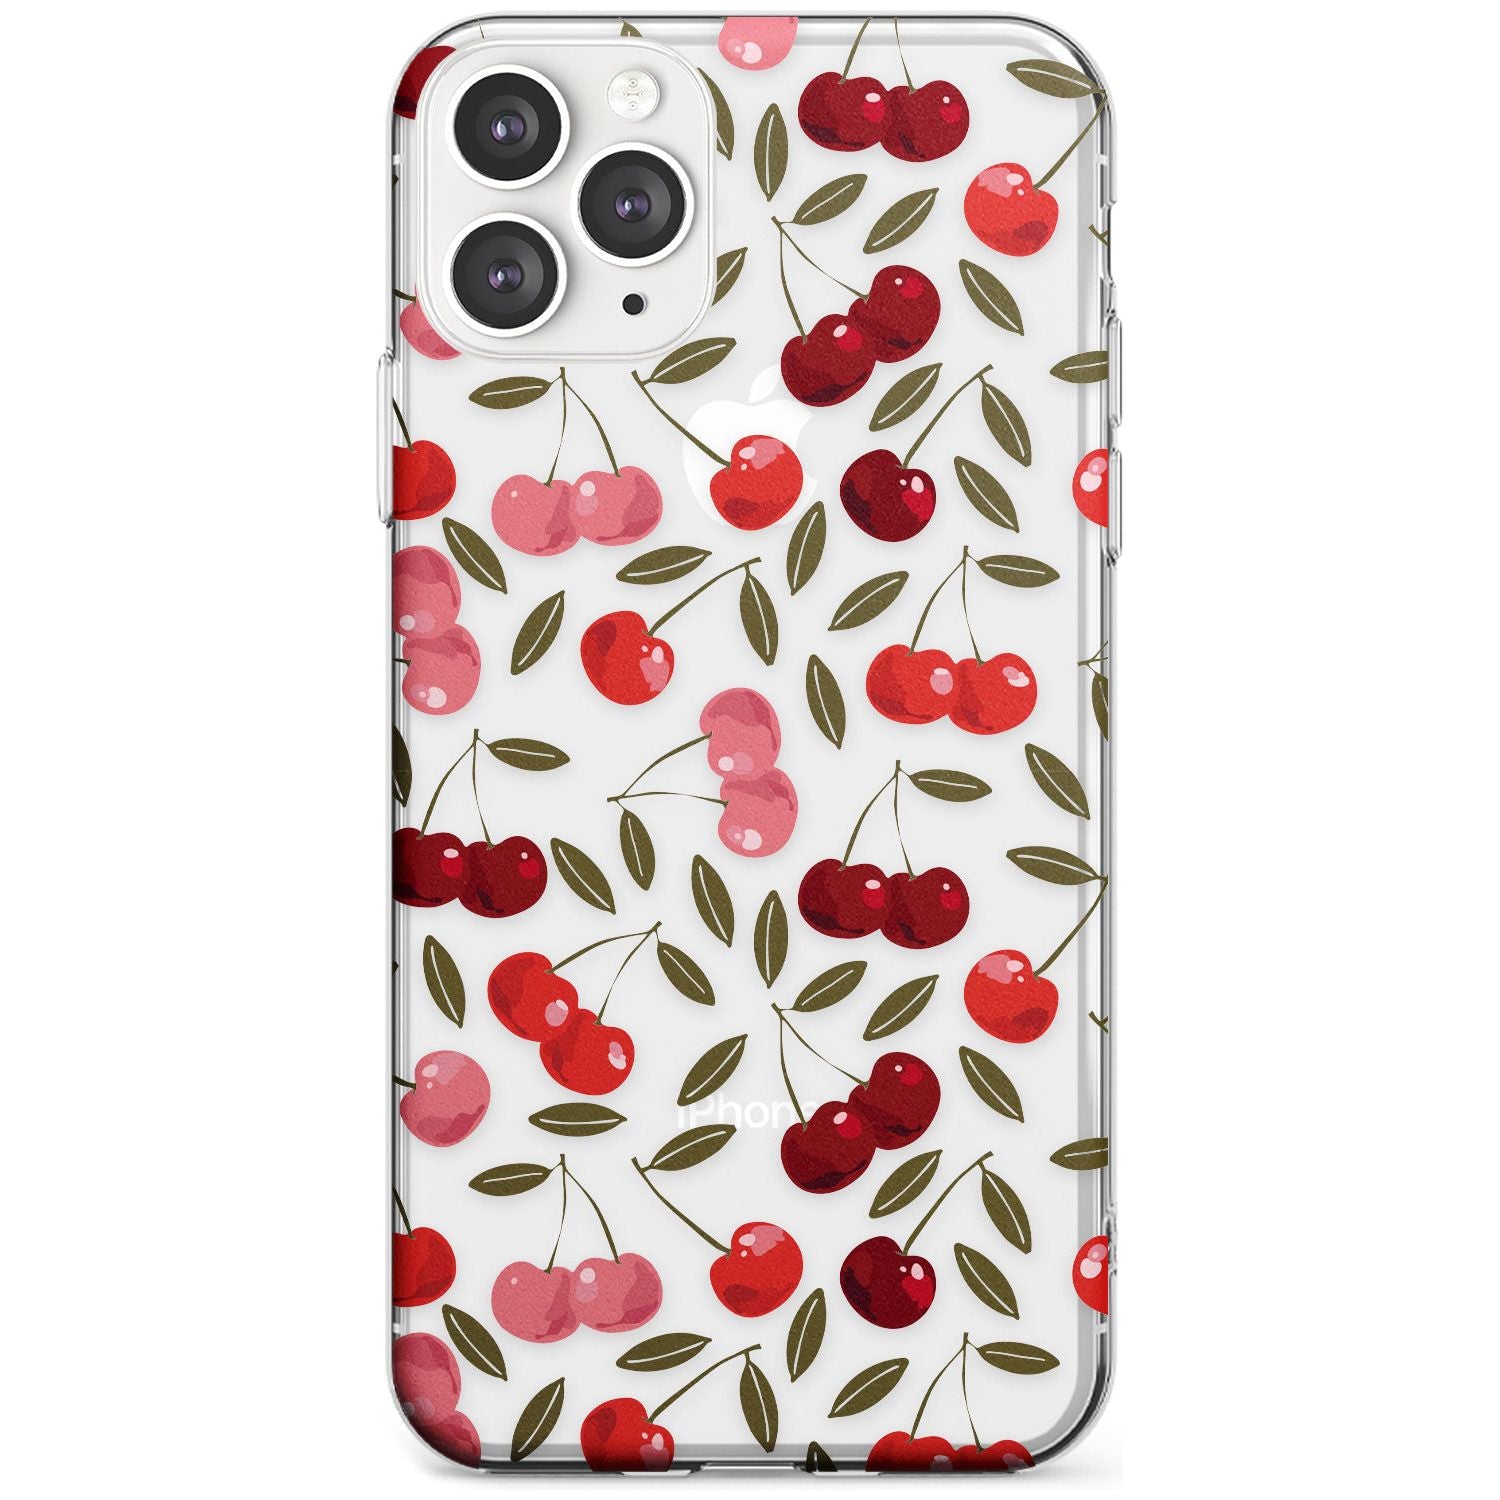 Cherry on top Slim TPU Phone Case for iPhone 11 Pro Max